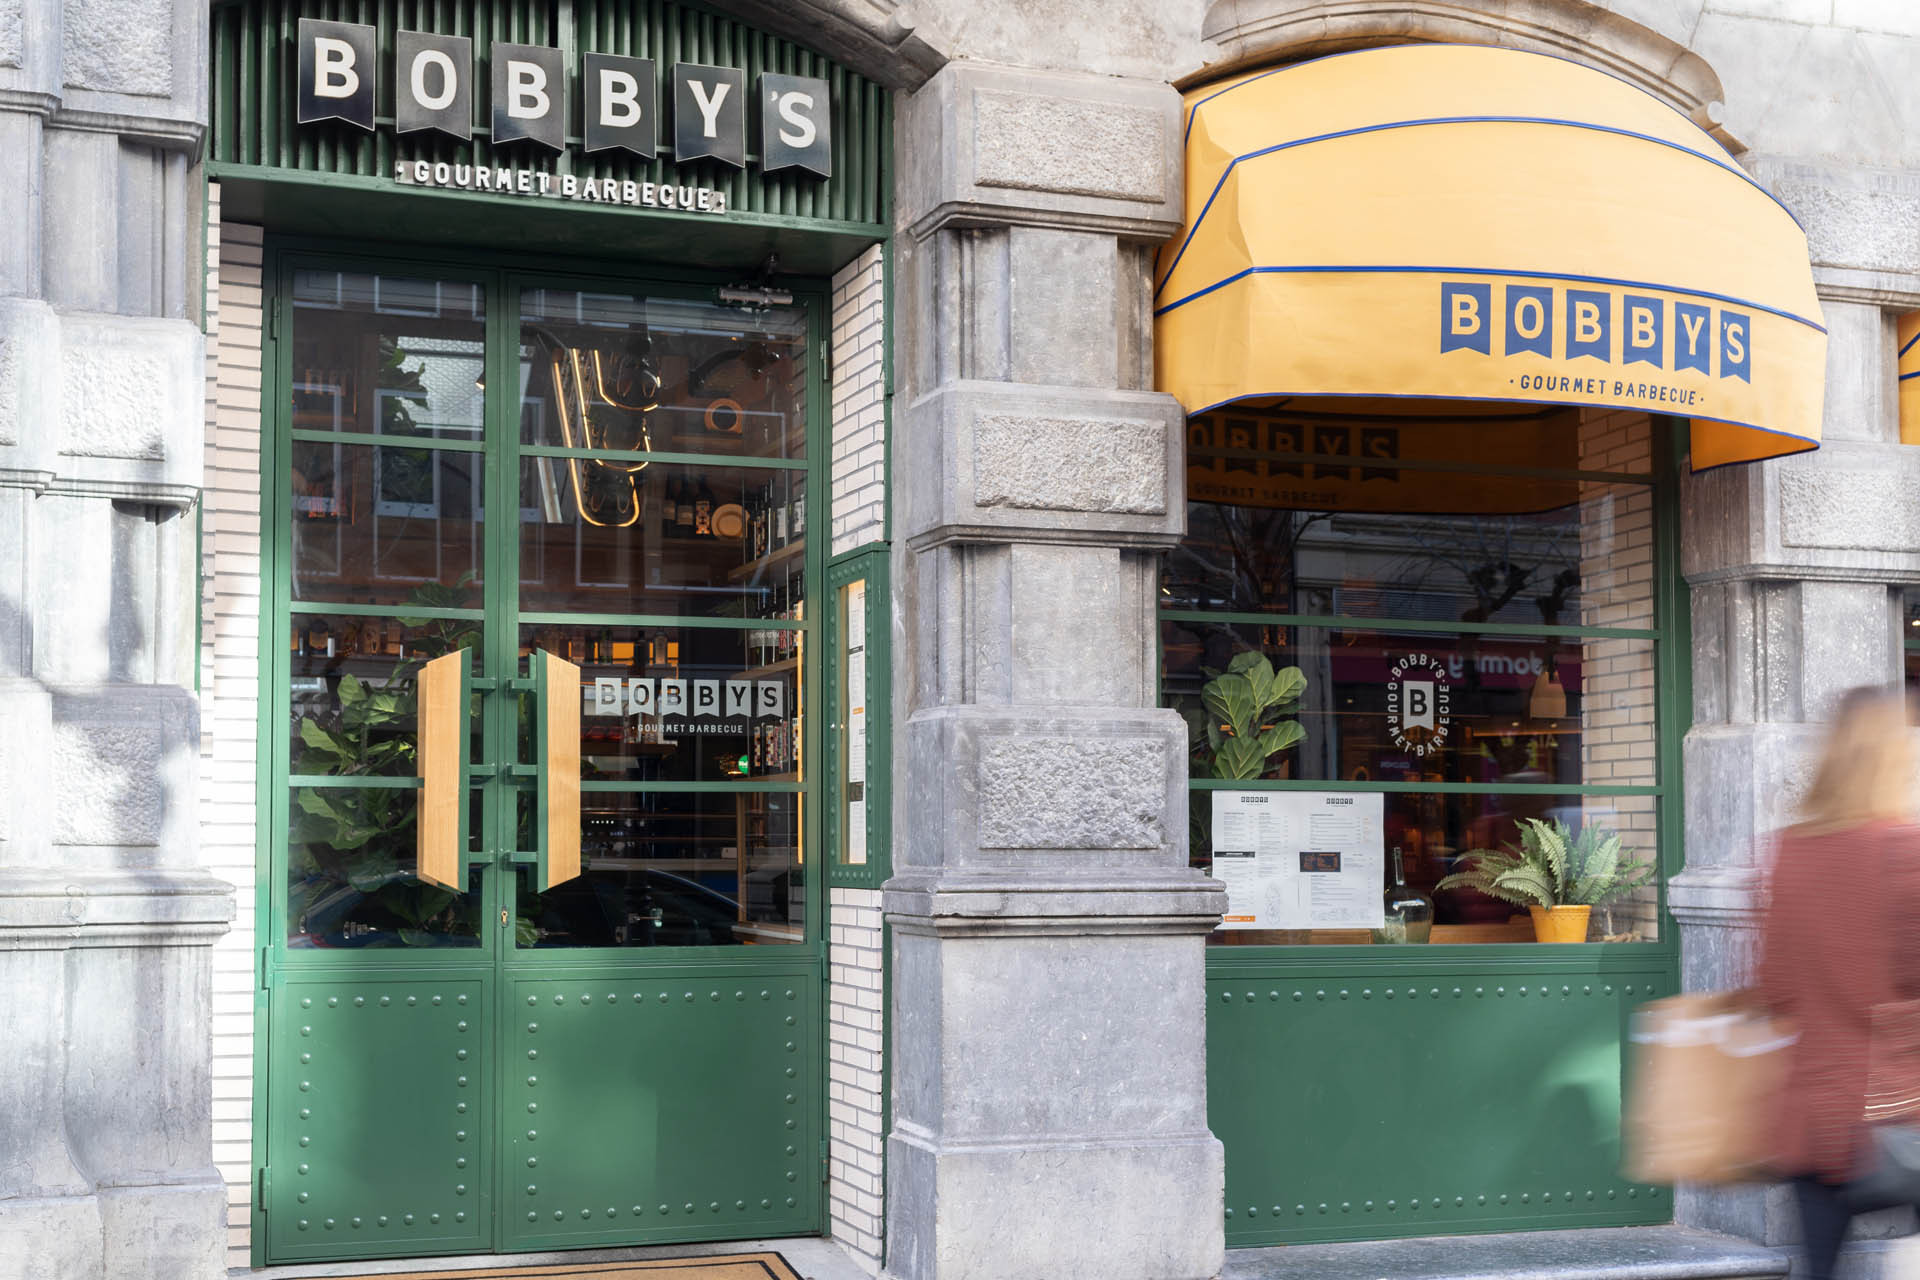 Bobby's Gourmet Barbecue